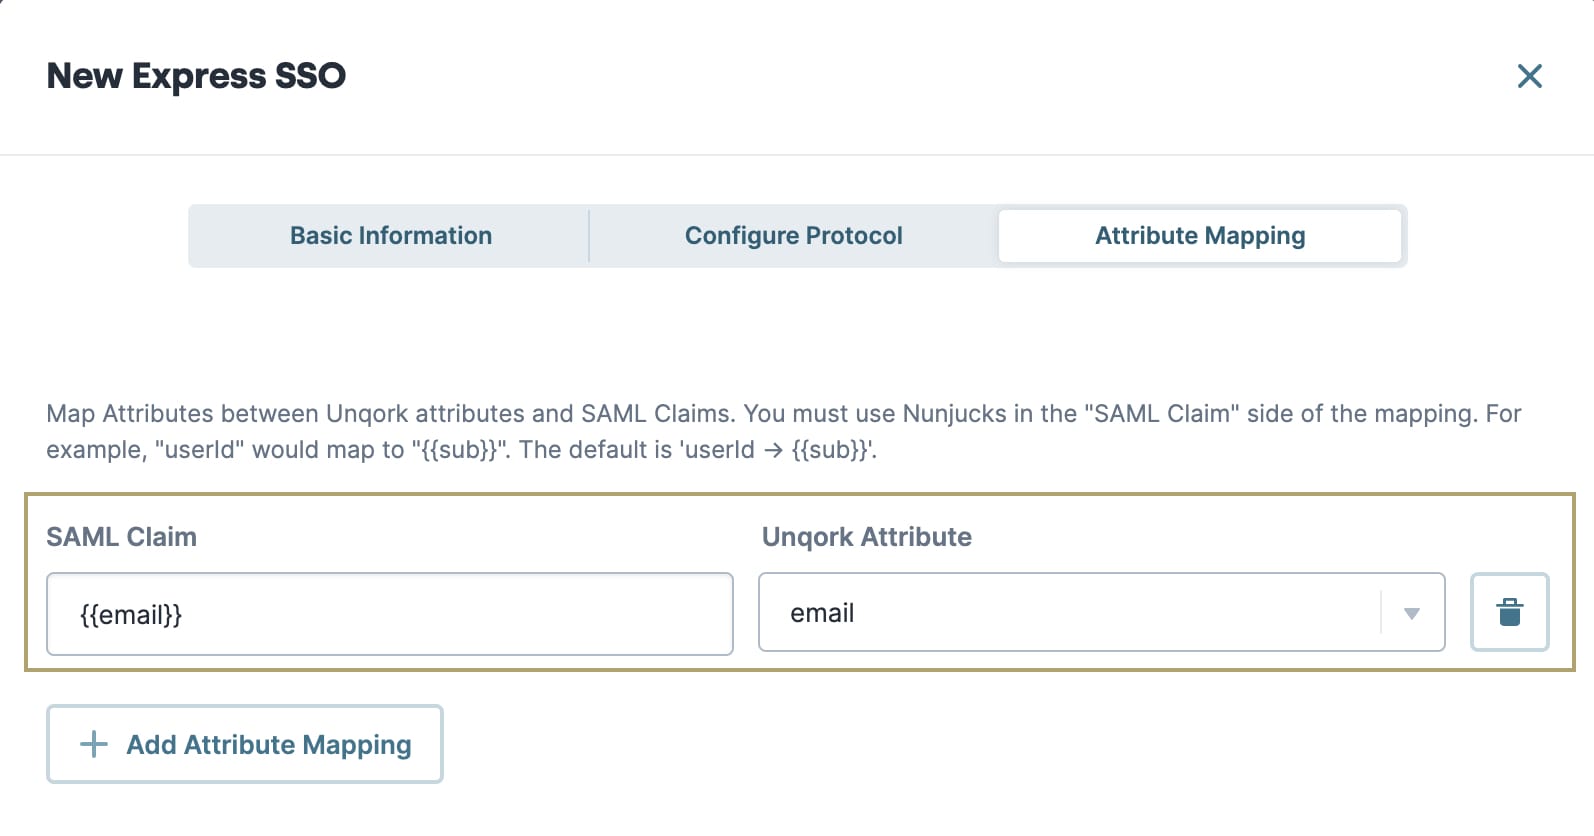 A static image displaying the New Express SSO modal. The tab is set to Attribute Mapping. The unqork attribute is set to email and the samel claim is set to email in brackets.